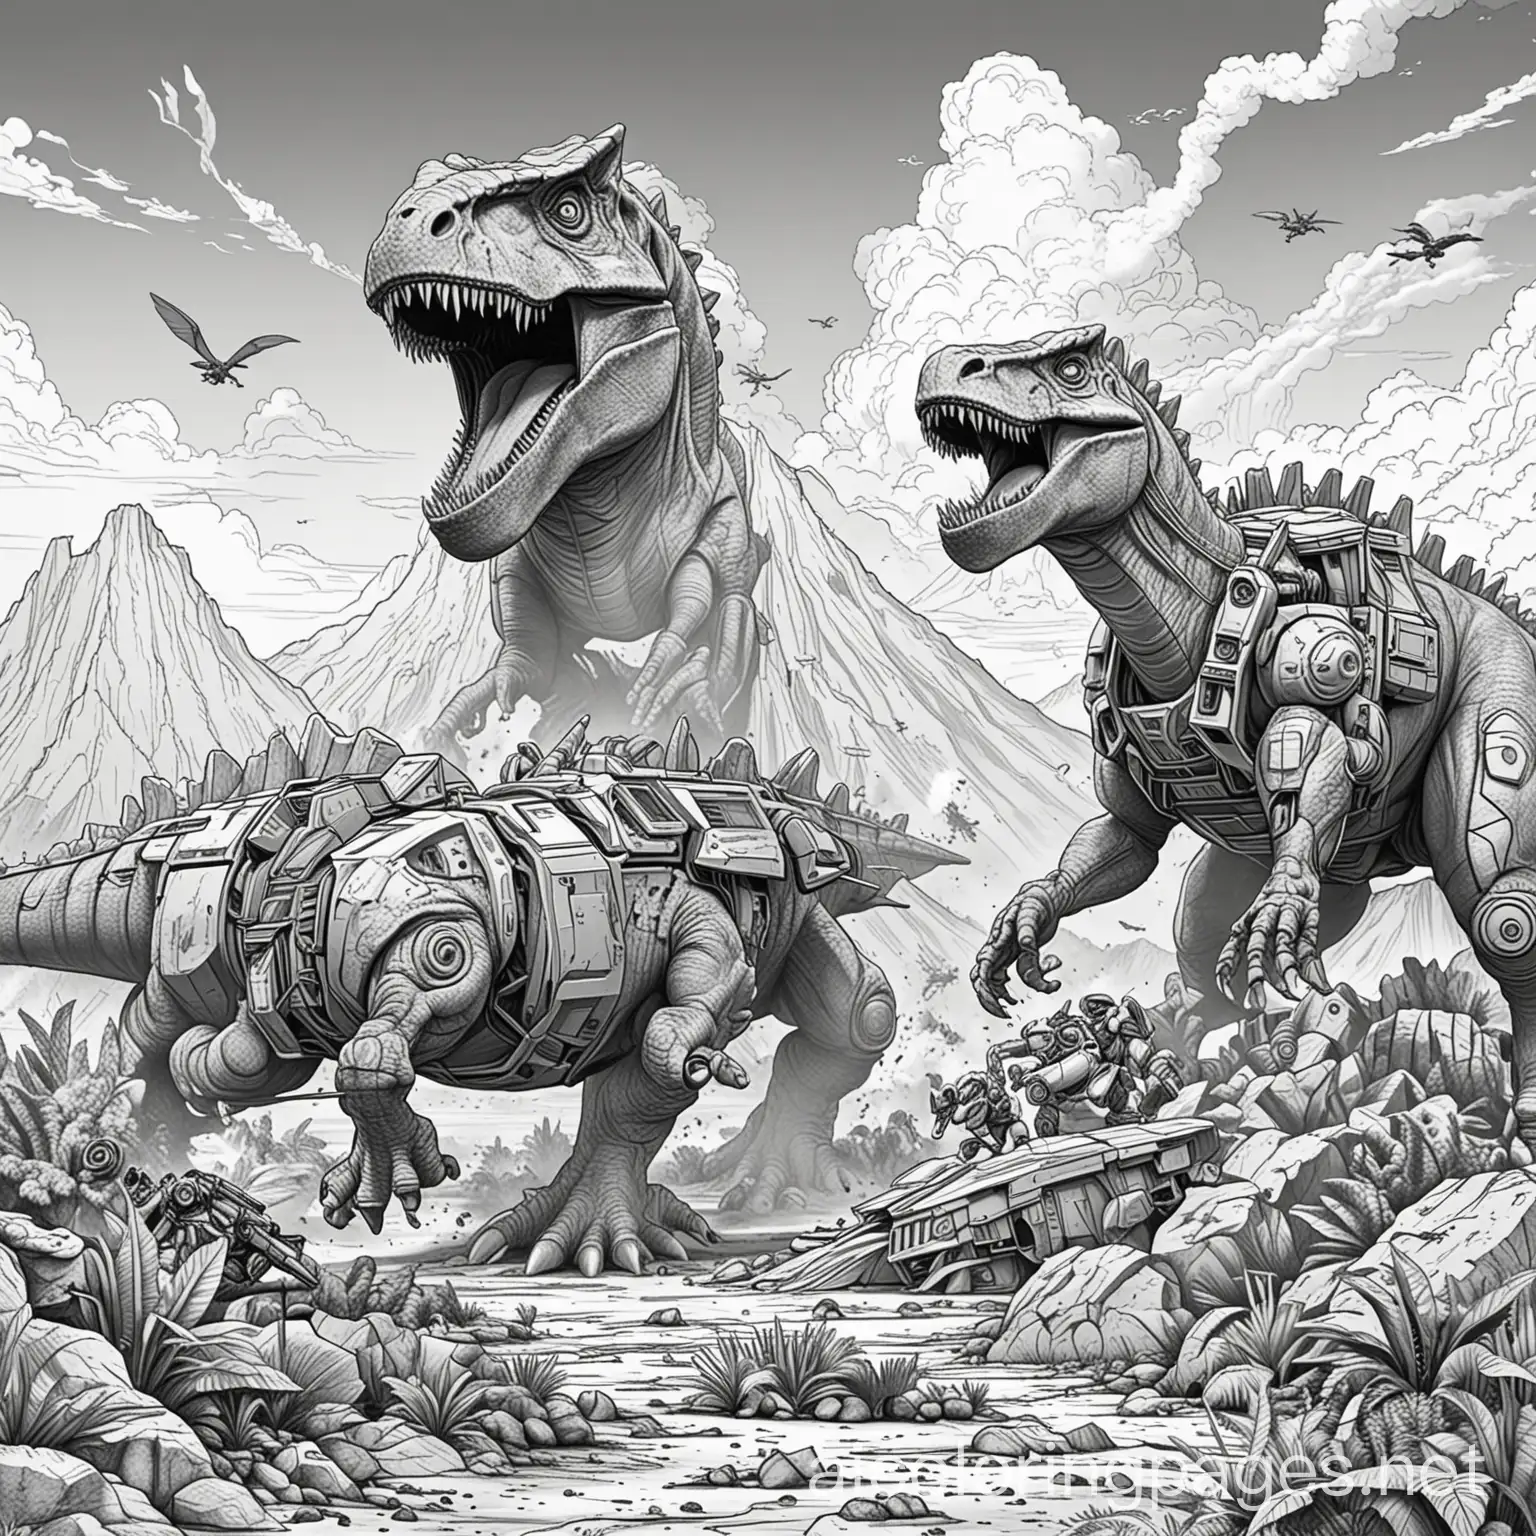 Dinosaurs-vs-Transformers-Battle-in-Volcano-Coloring-Page